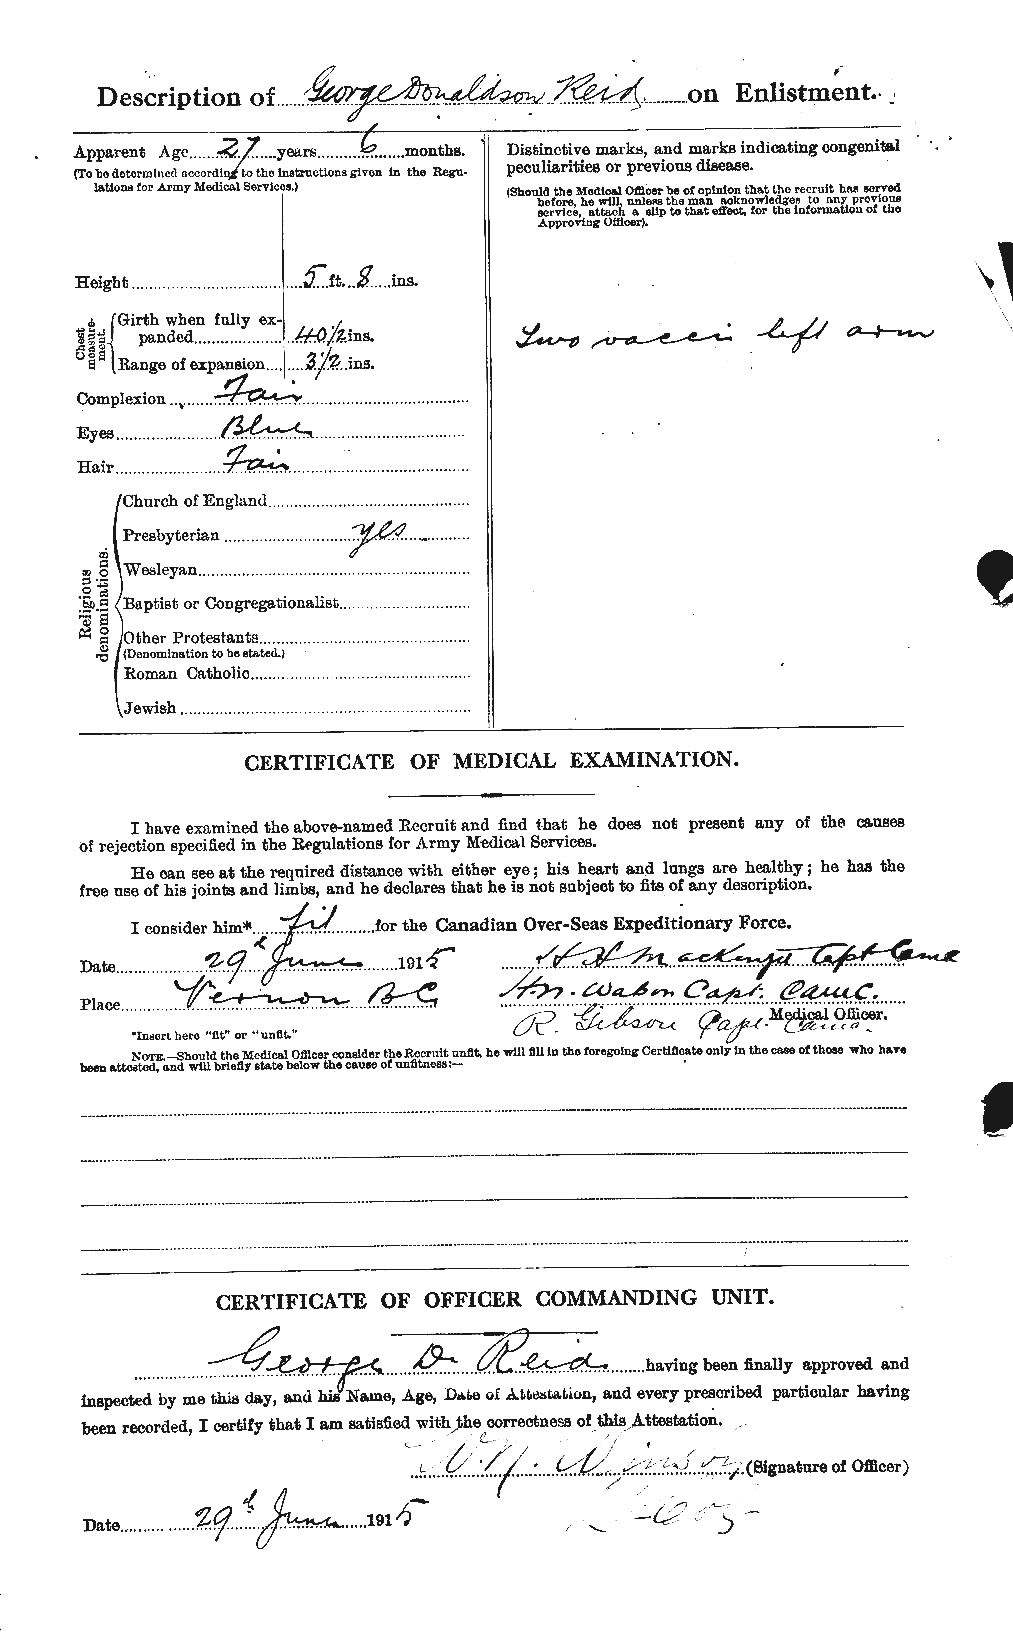 Personnel Records of the First World War - CEF 596290b